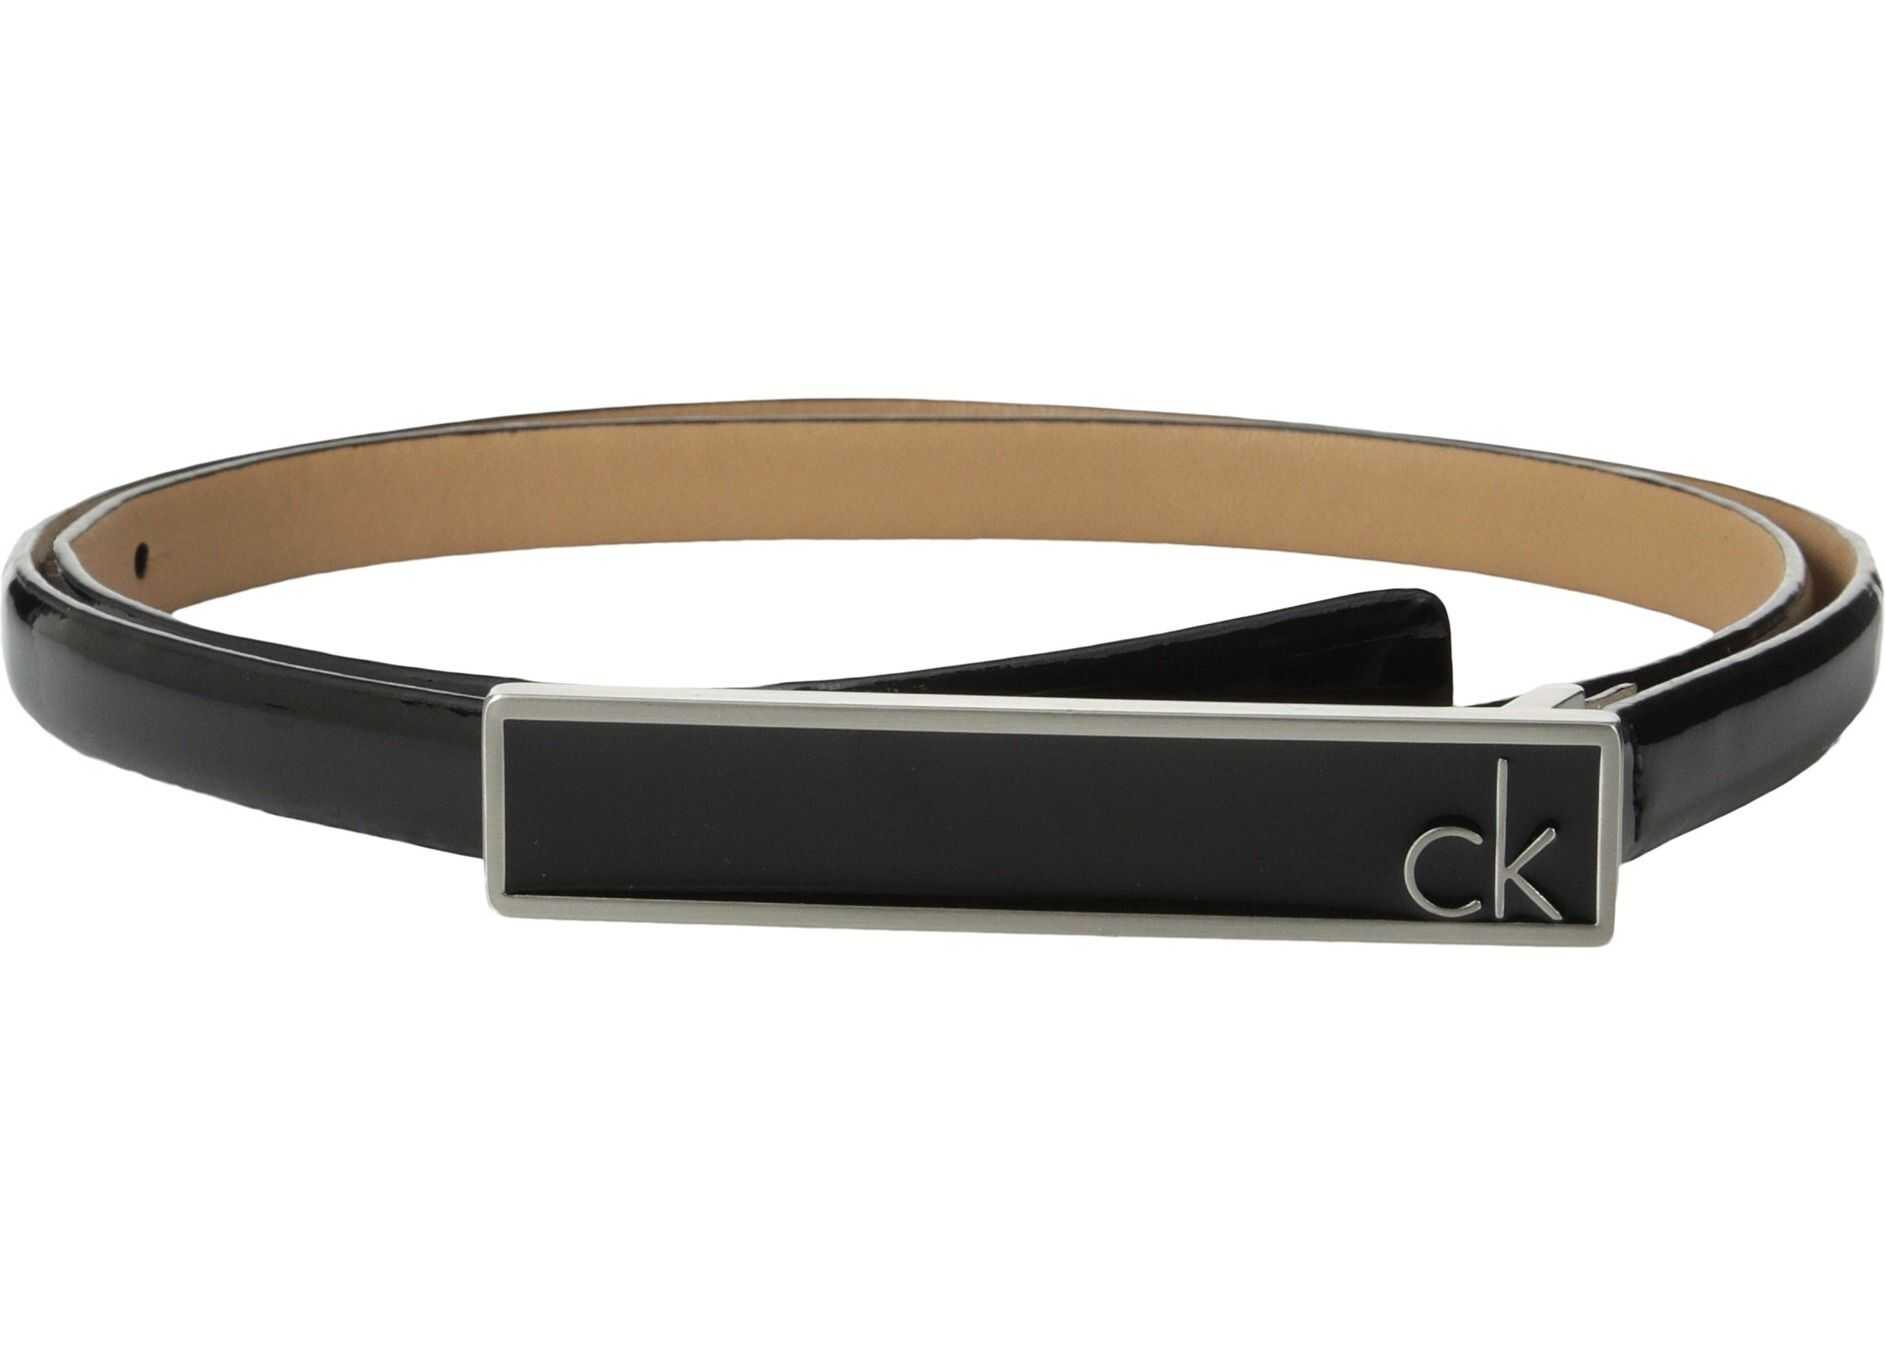 Calvin Klein 16mm Feather Edge Patent Leather Belt with Plaque Buckle and Ena* Black